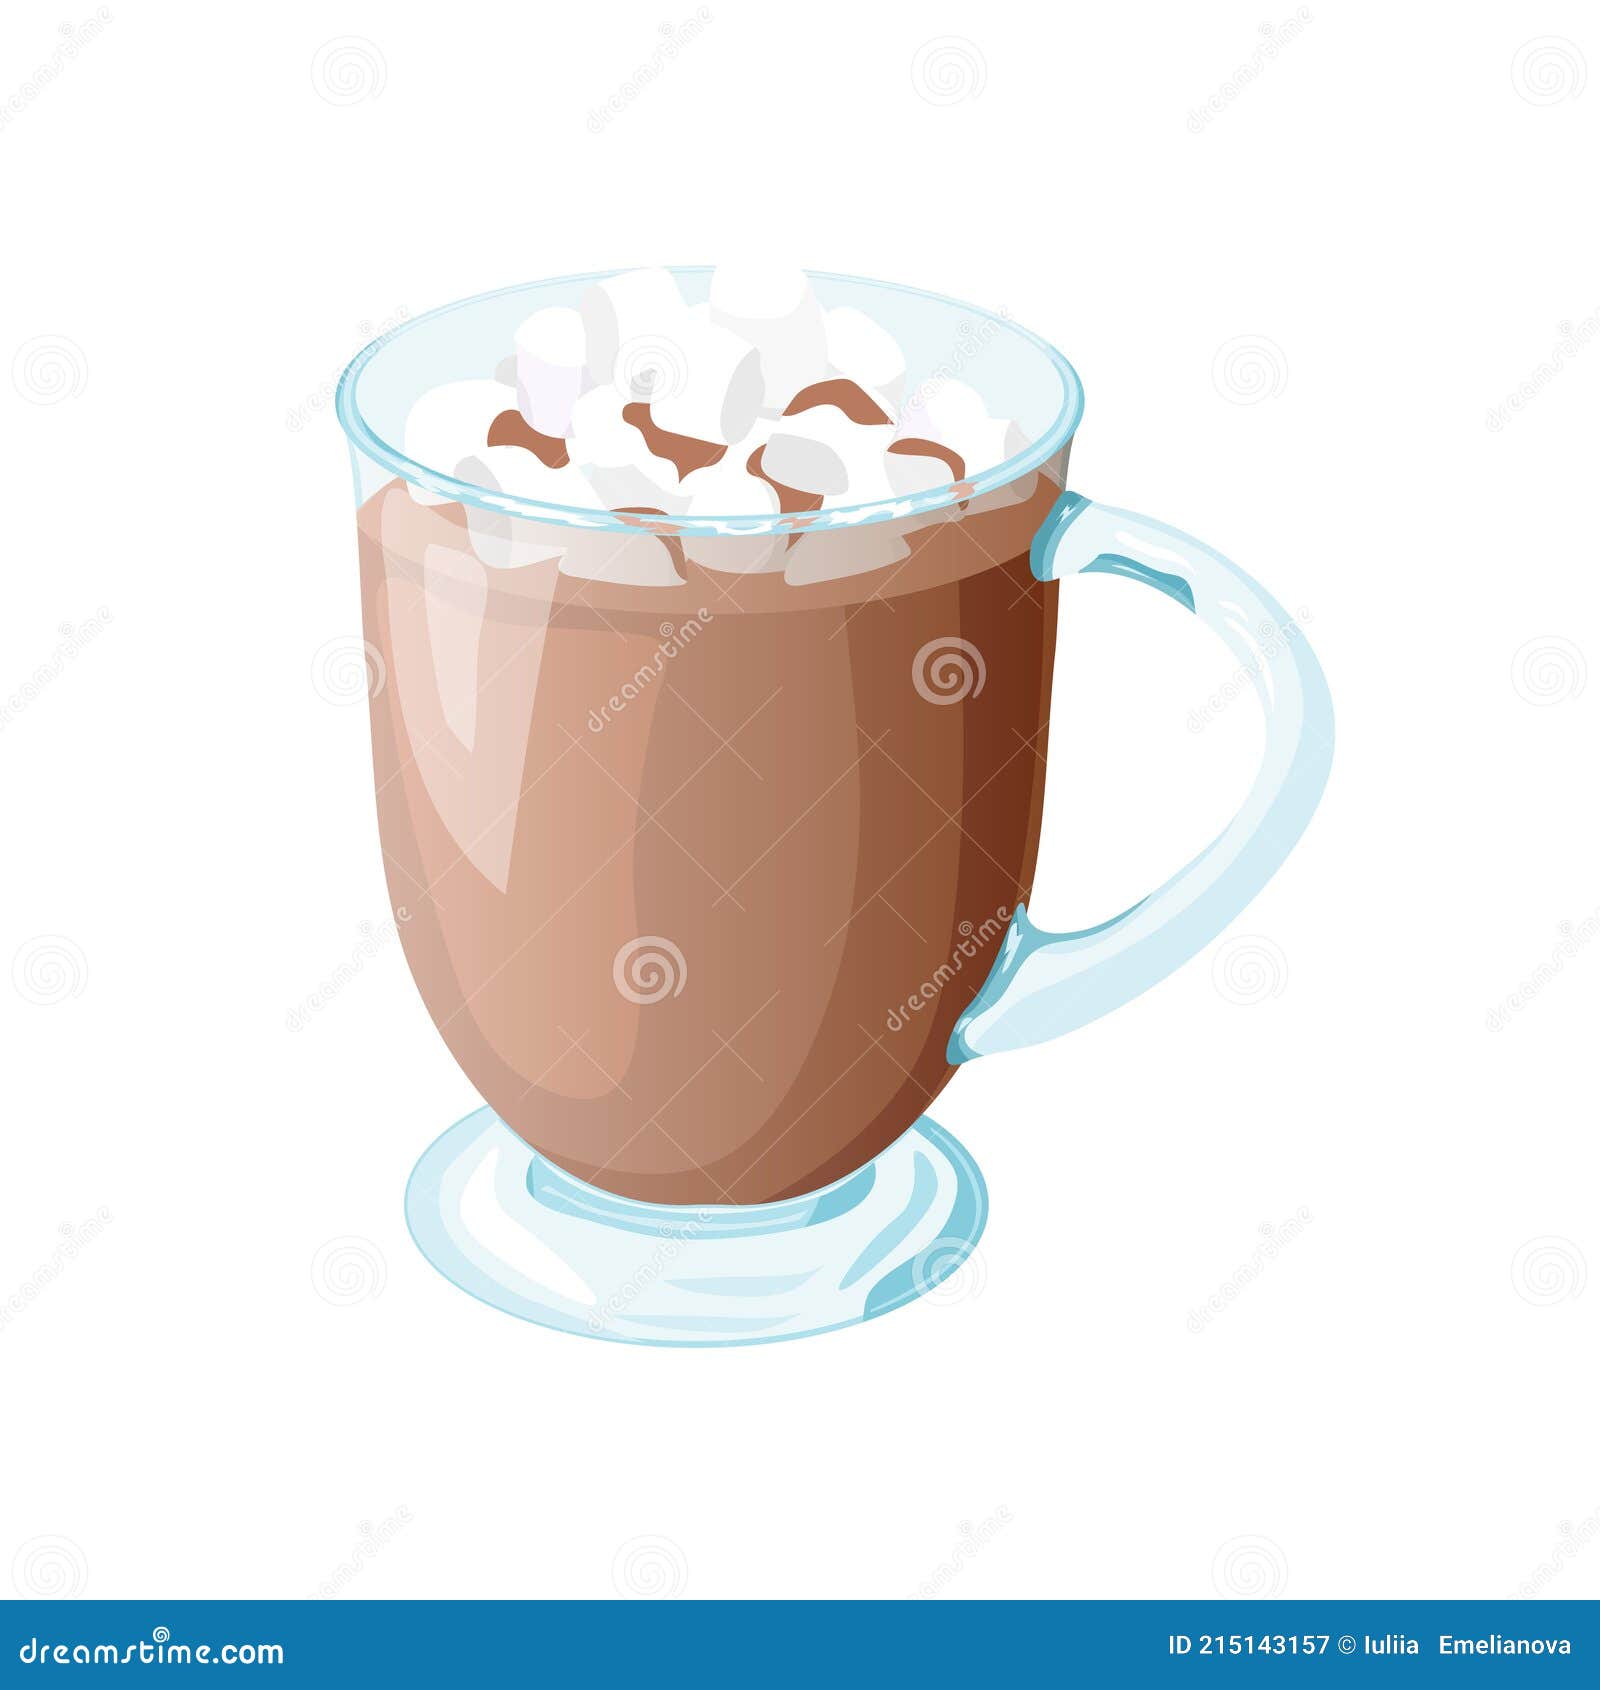 https://thumbs.dreamstime.com/z/hot-chocolate-mug-marshmallows-isolated-vector-cacao-white-background-illustration-cartoon-style-cocoa-drink-glass-cup-215143157.jpg